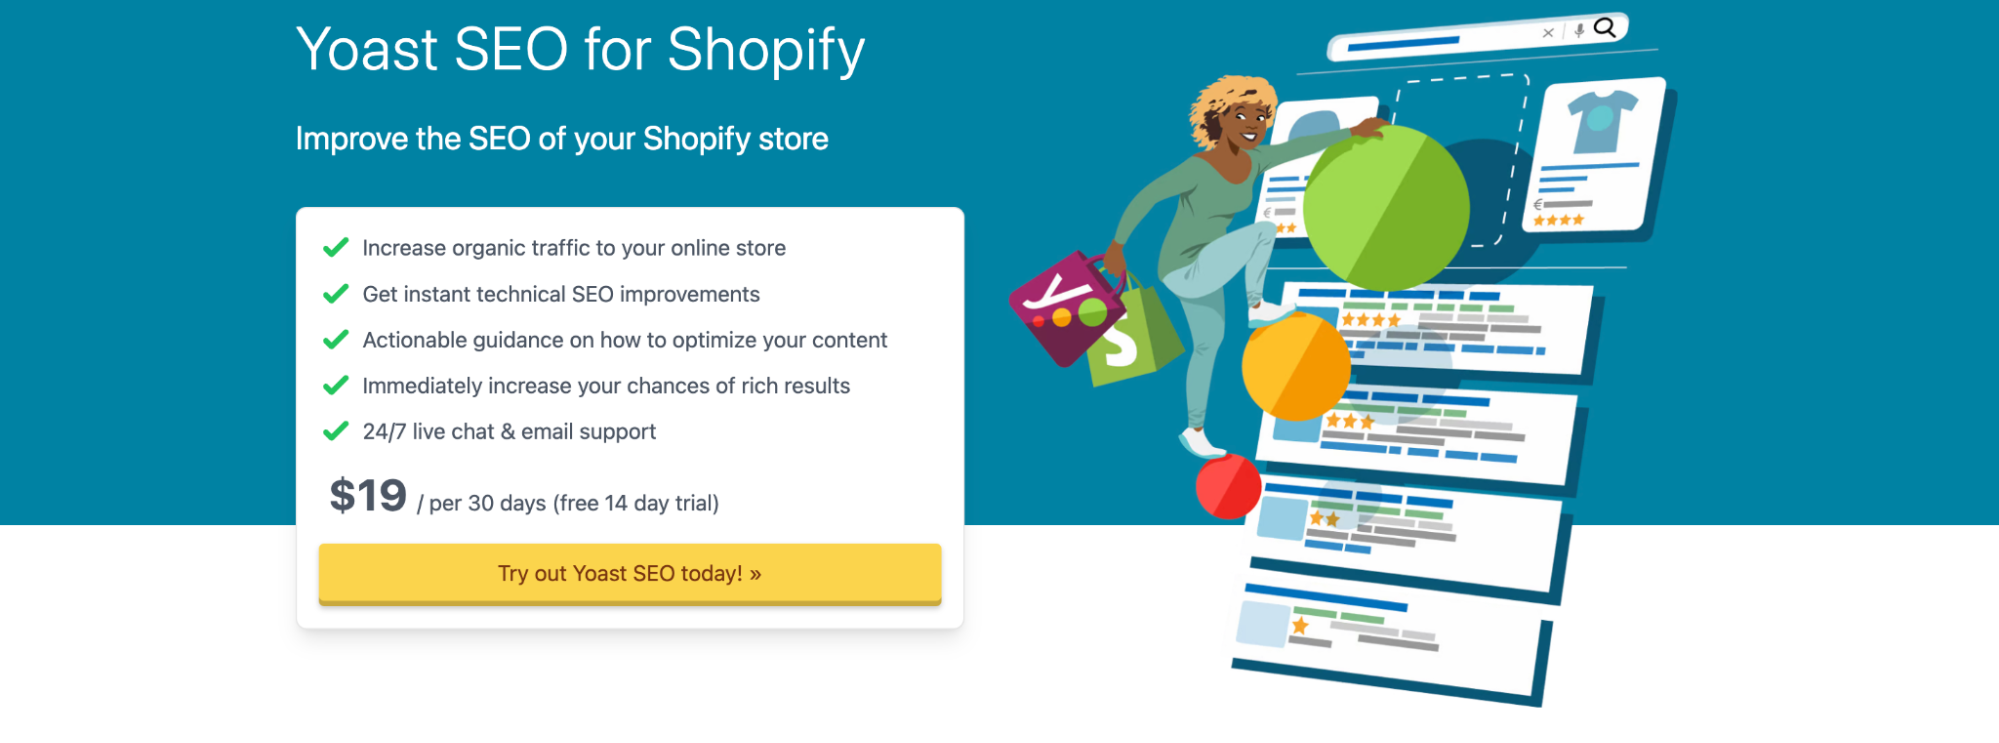 Yoast SEO for Shopify page